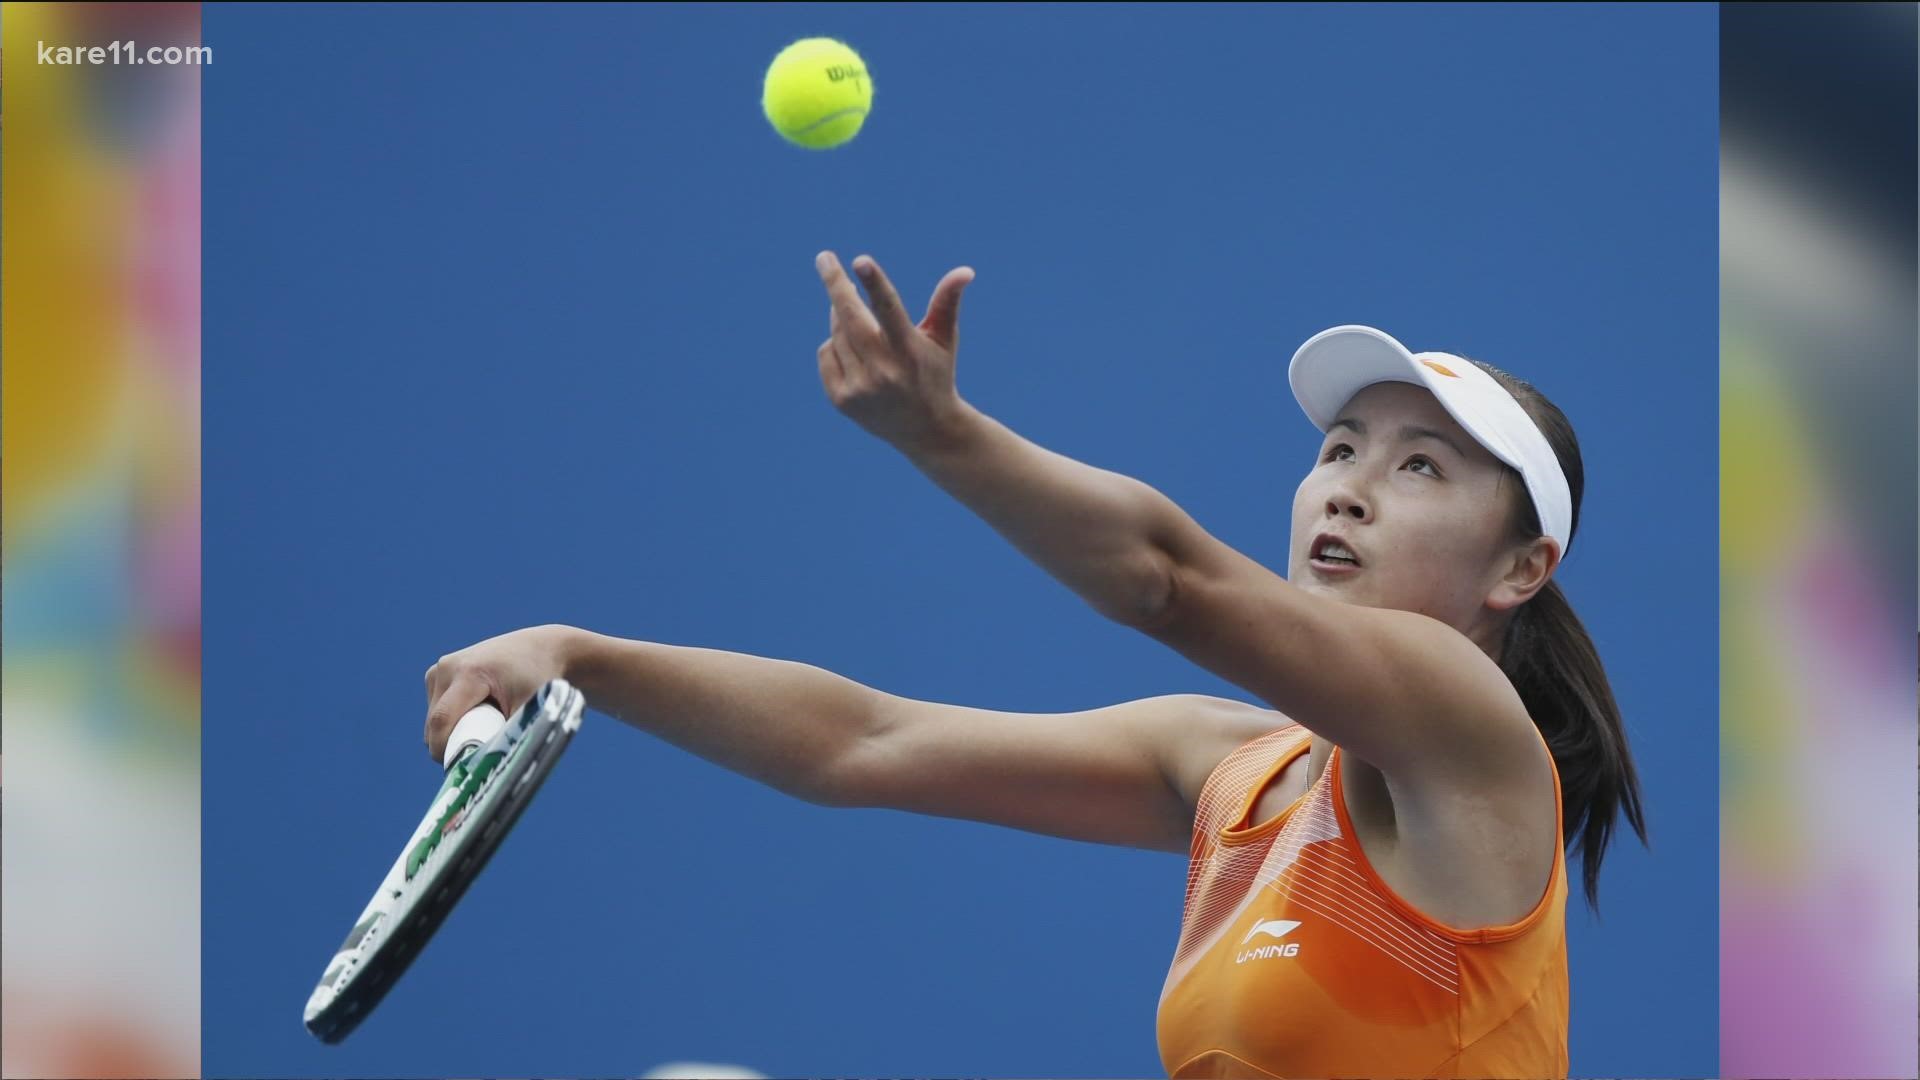 The Chinese tennis star hasn't been seen in public since she posted allegation against a former government official earlier this month.